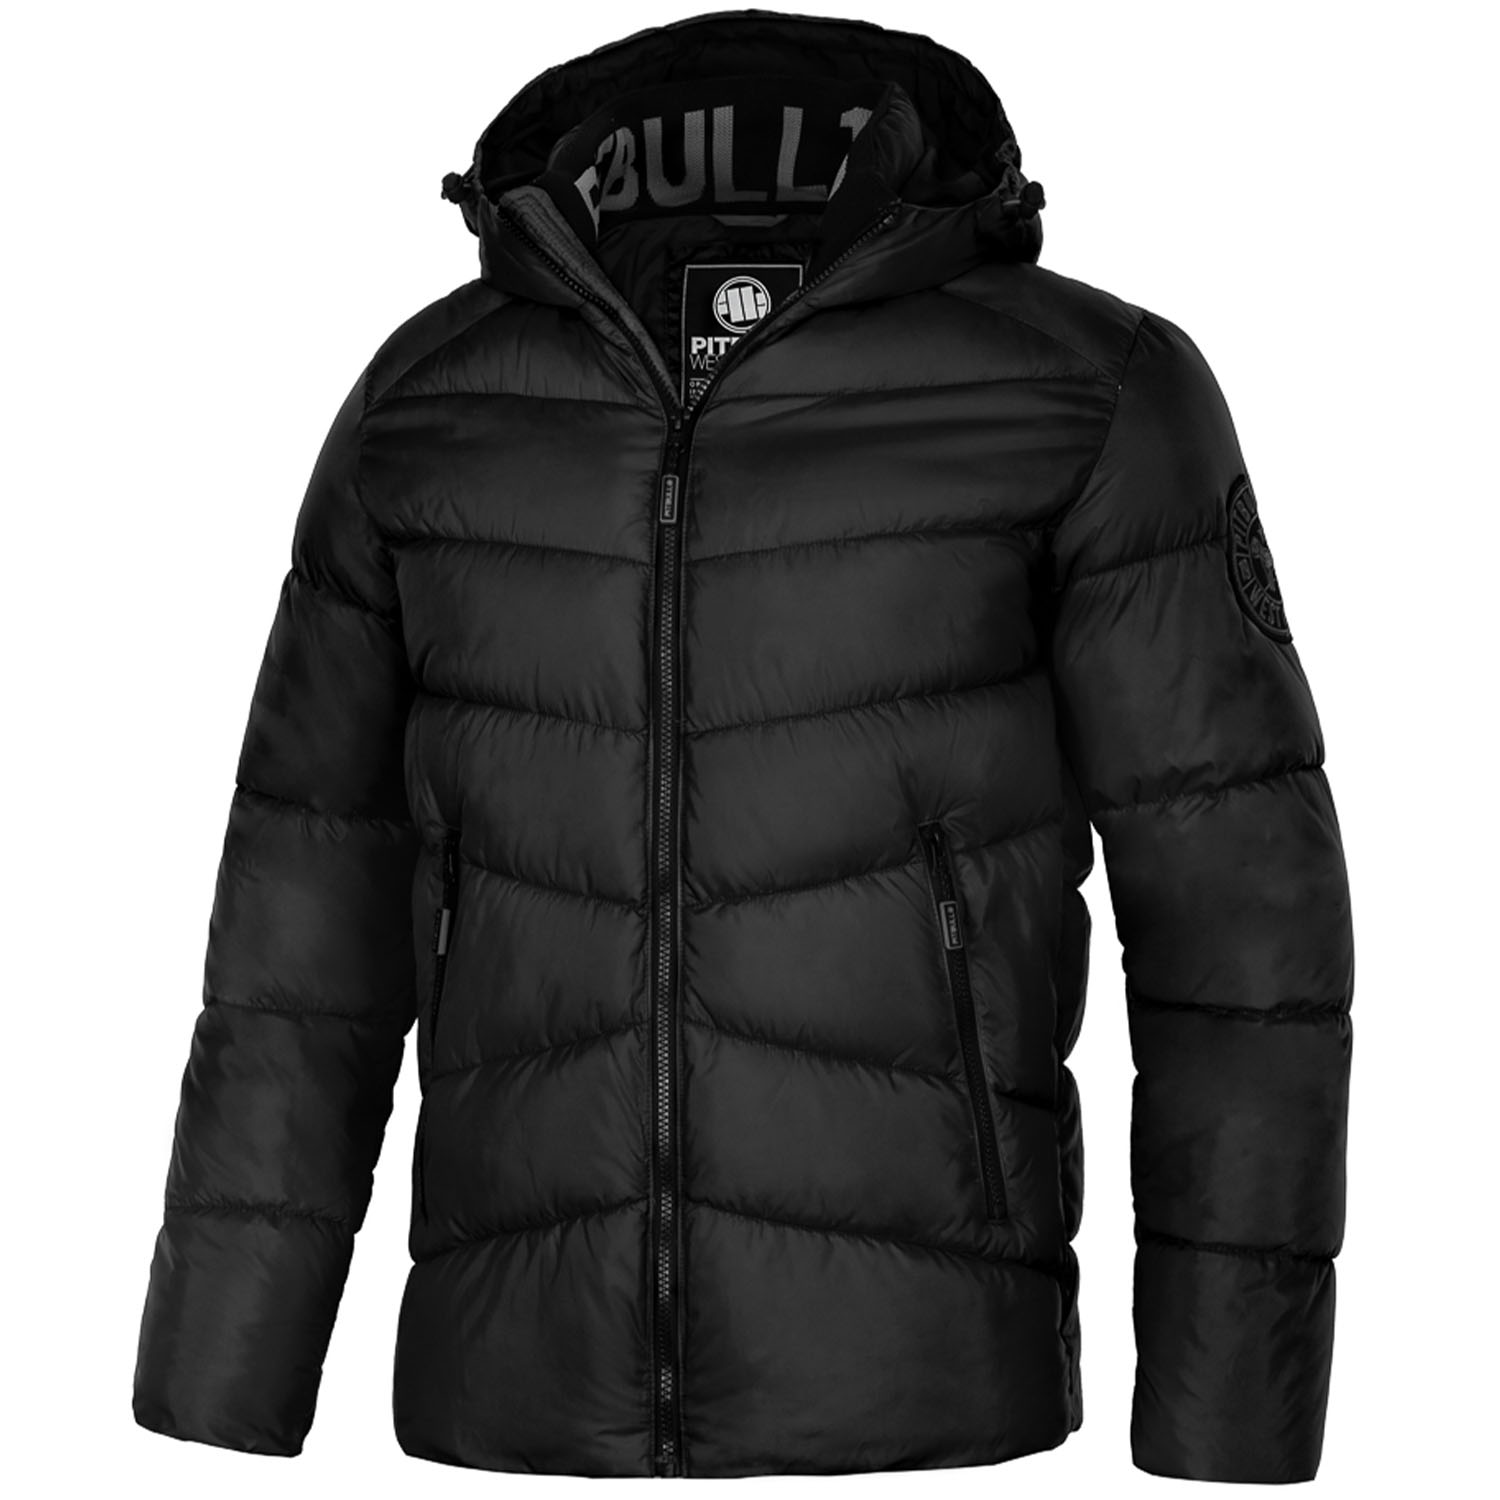 Pit Bull West Coast Jacket, Padded, Quilted Mobley, black, L